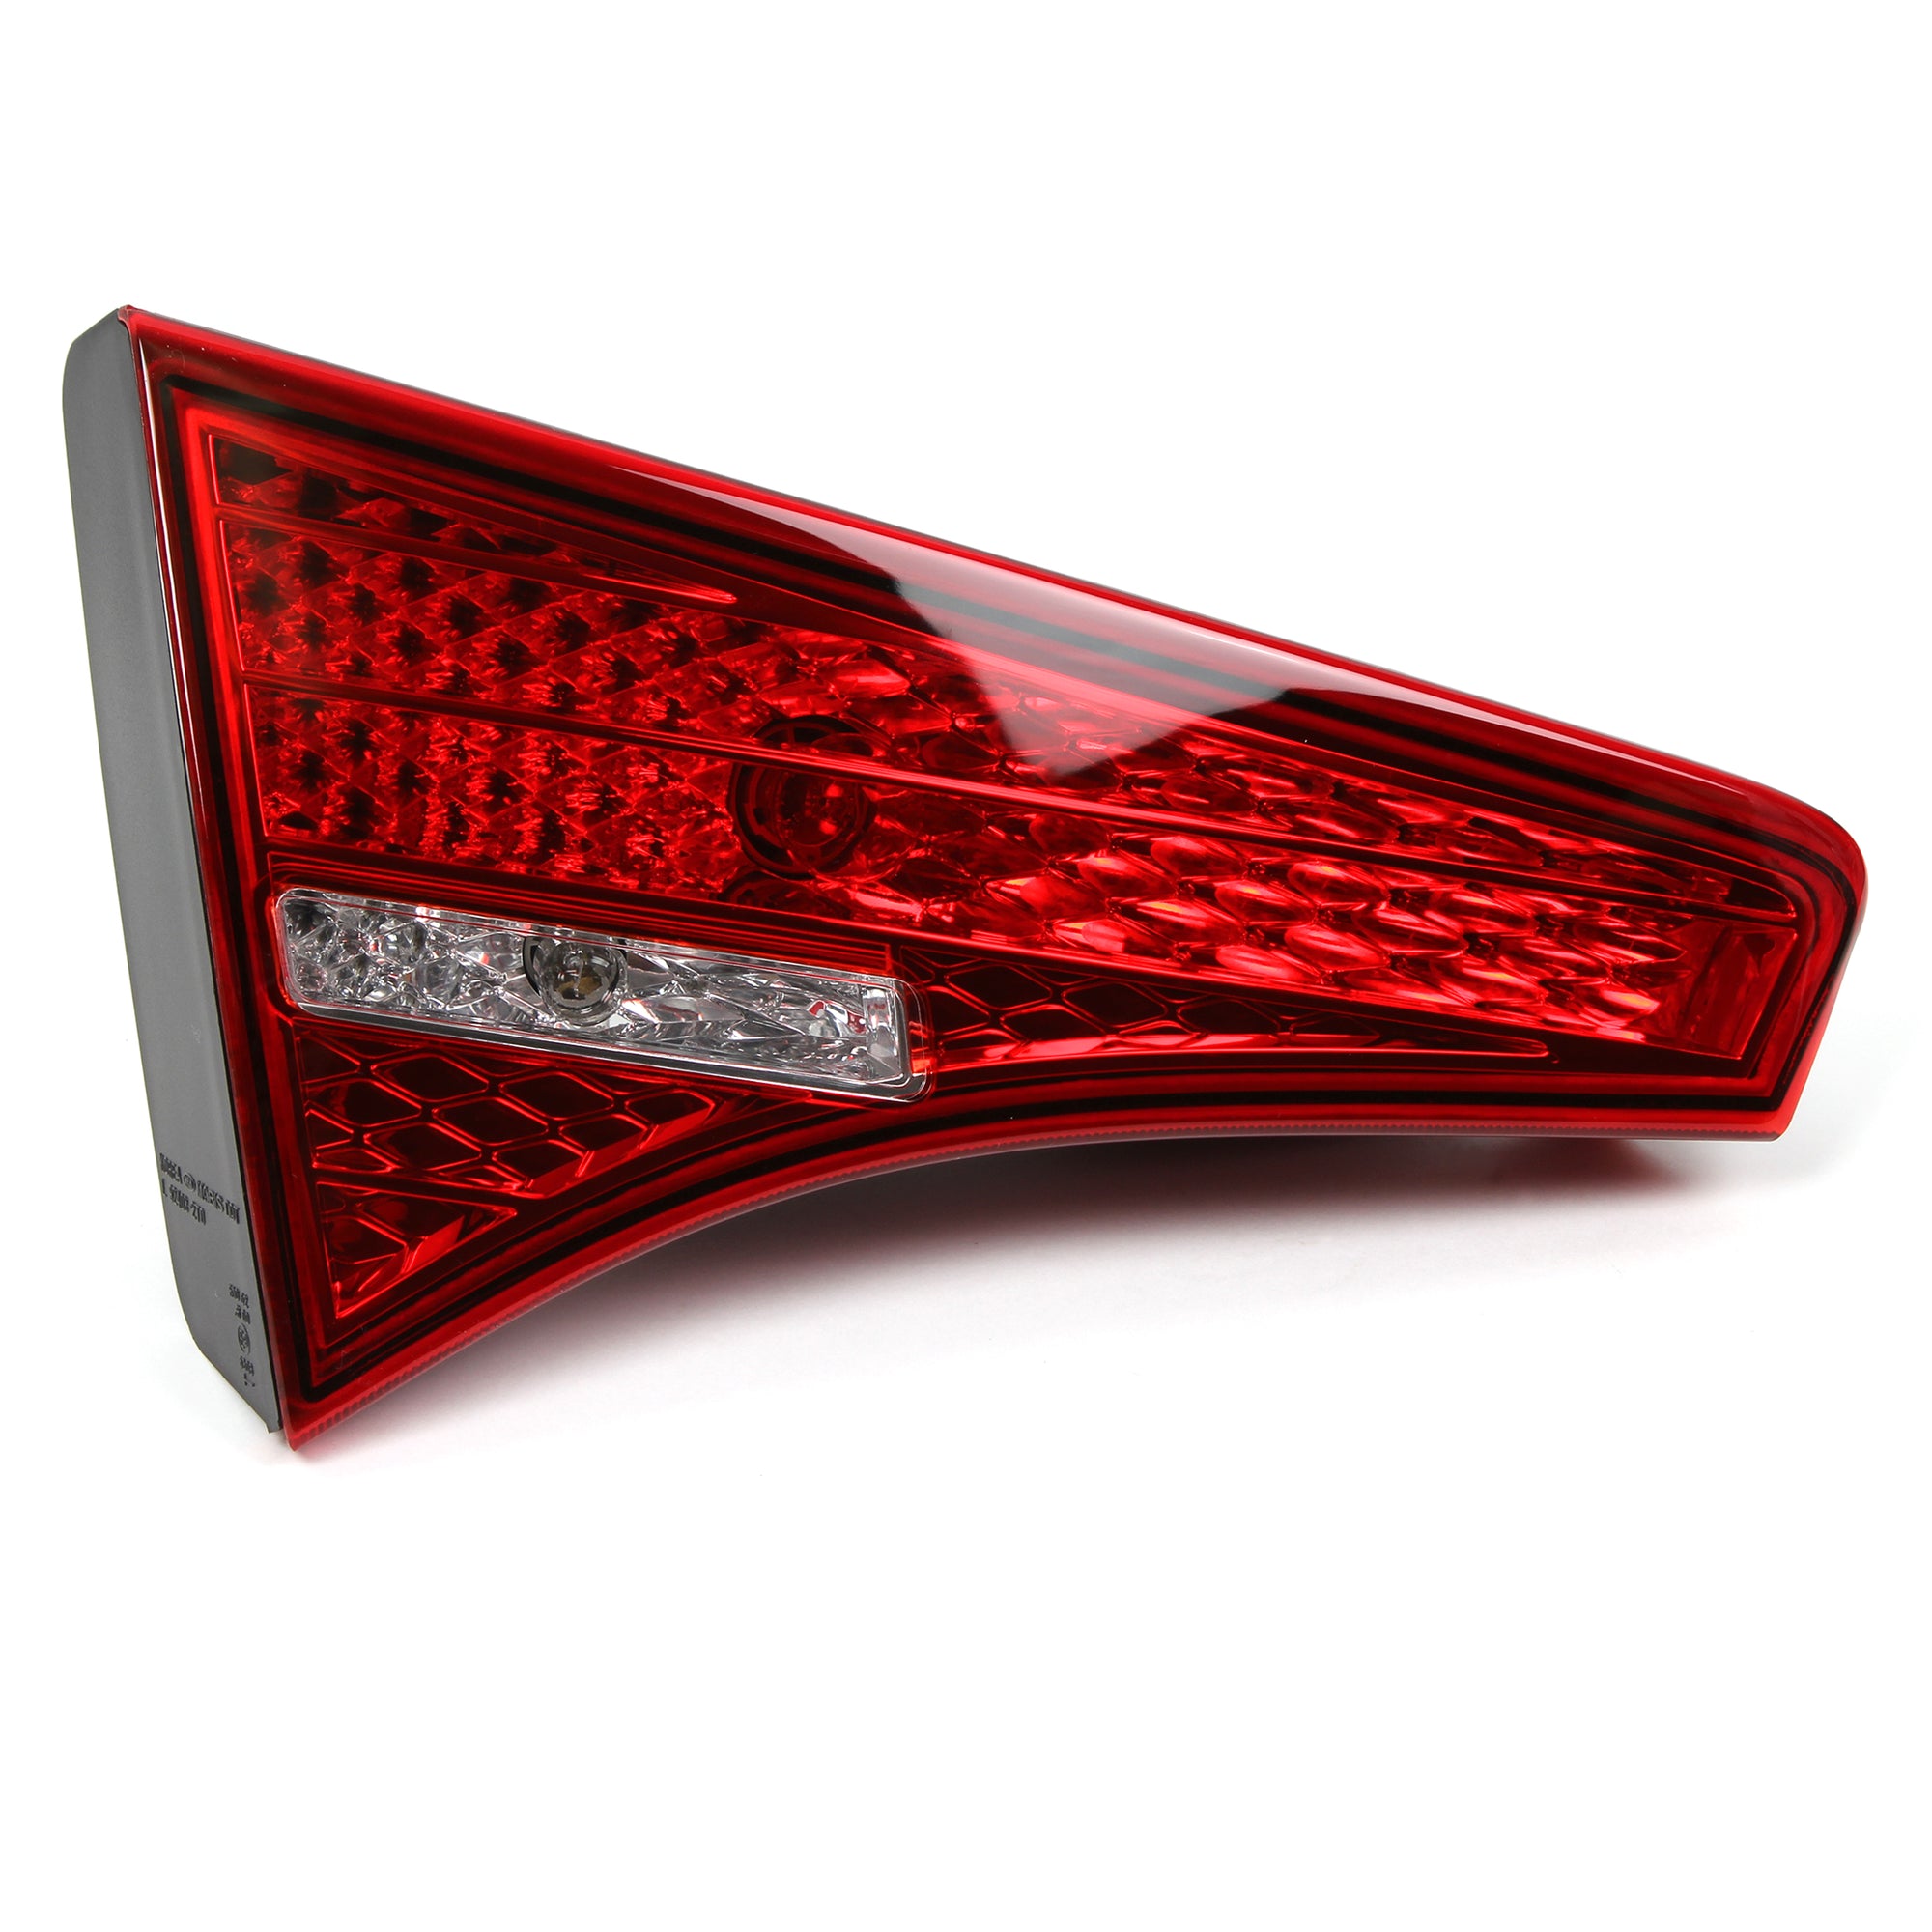 GENUINE Taillight Tail lamp DRIVER LH for 11-13 Kia Optima OEM 92403-2T000